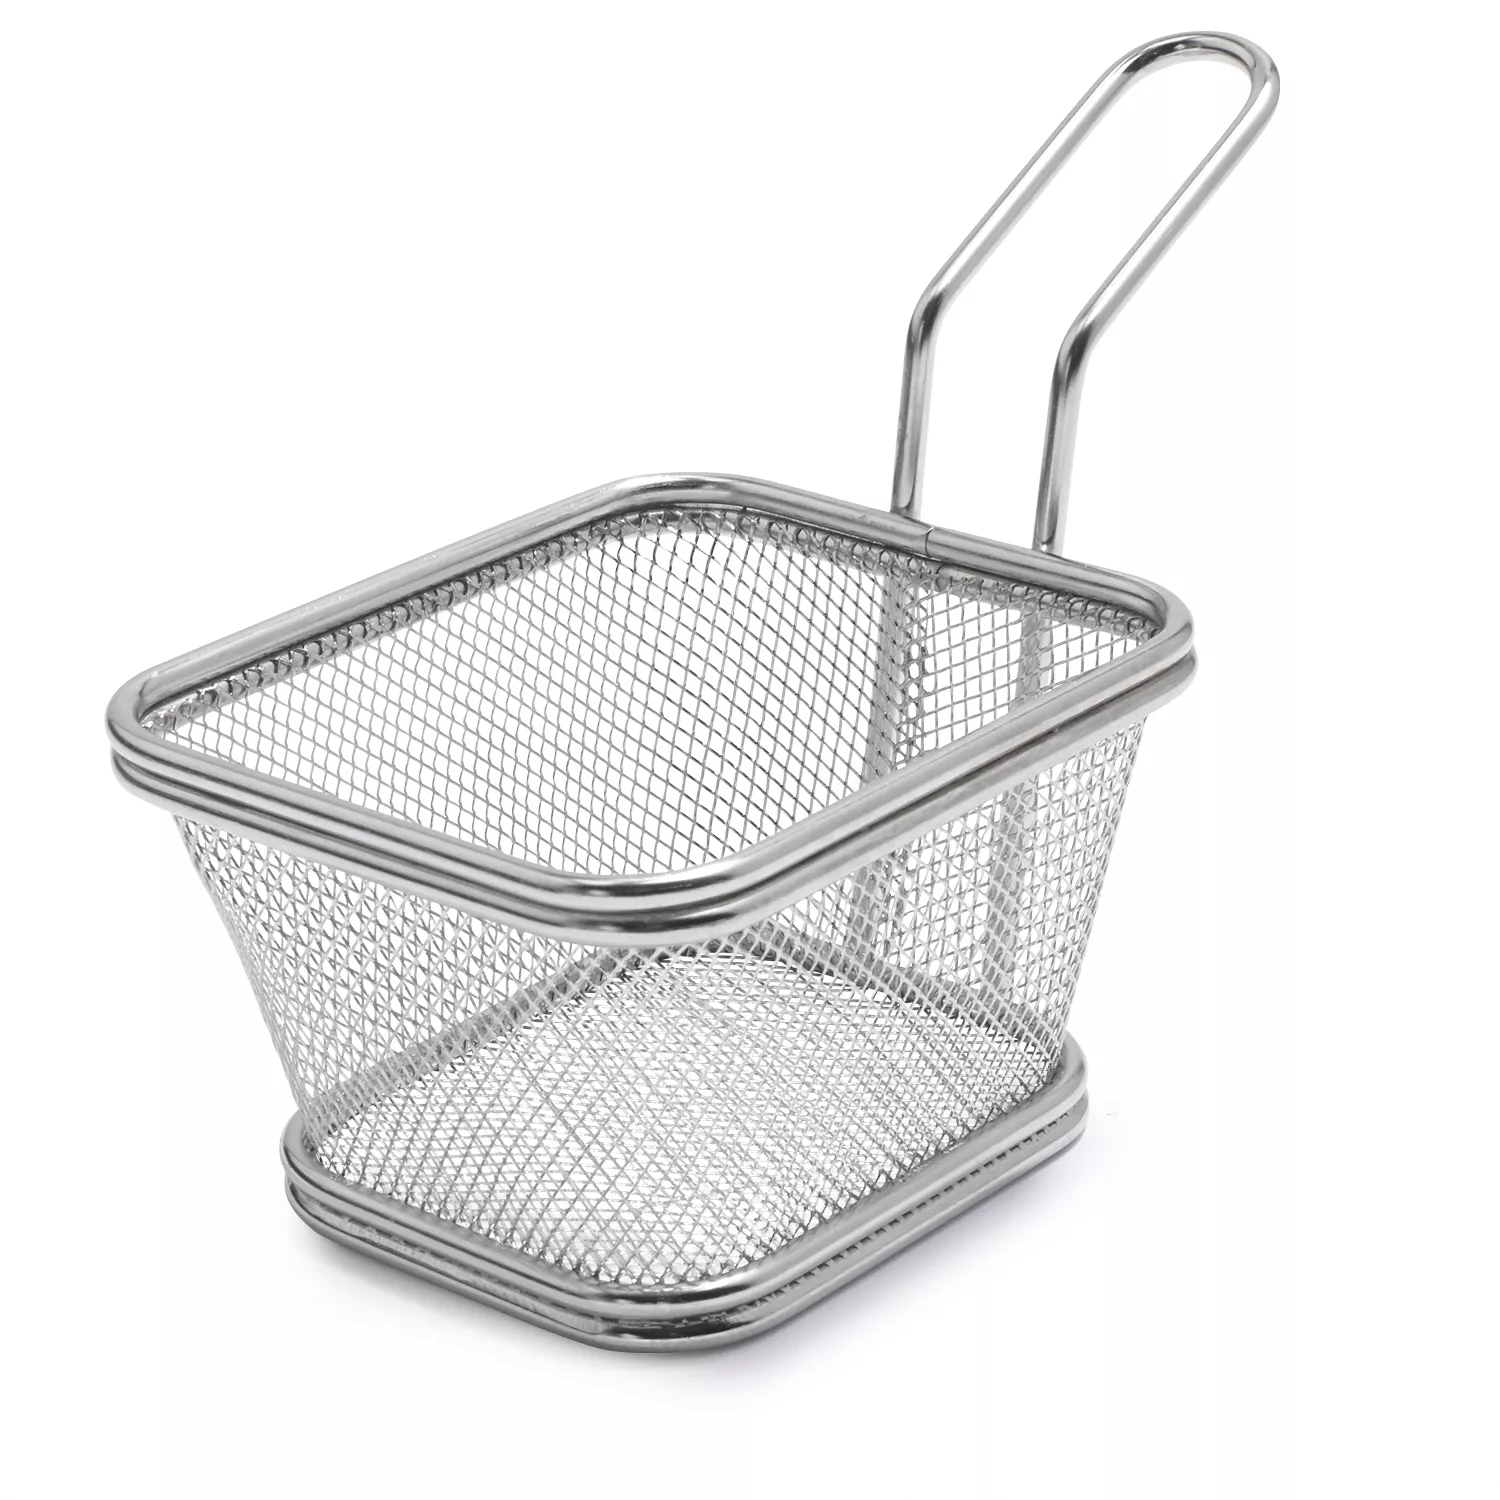 Deep Frying Technique with the All-Clad Stainless Steel Fry Basket 